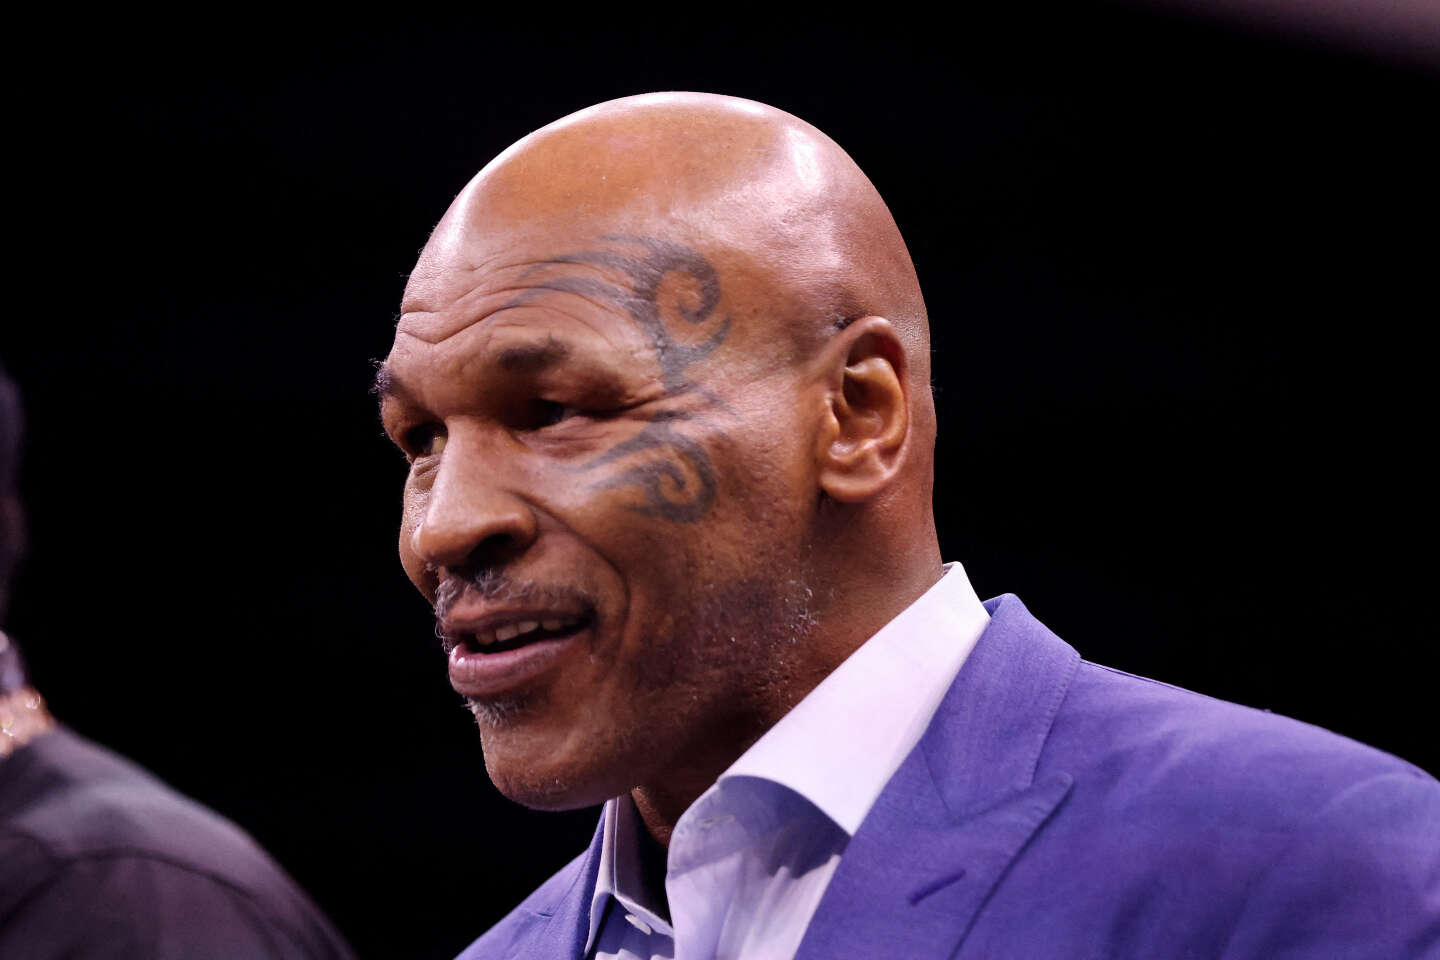 at 58, Mike Tyson will compete in a professional fight